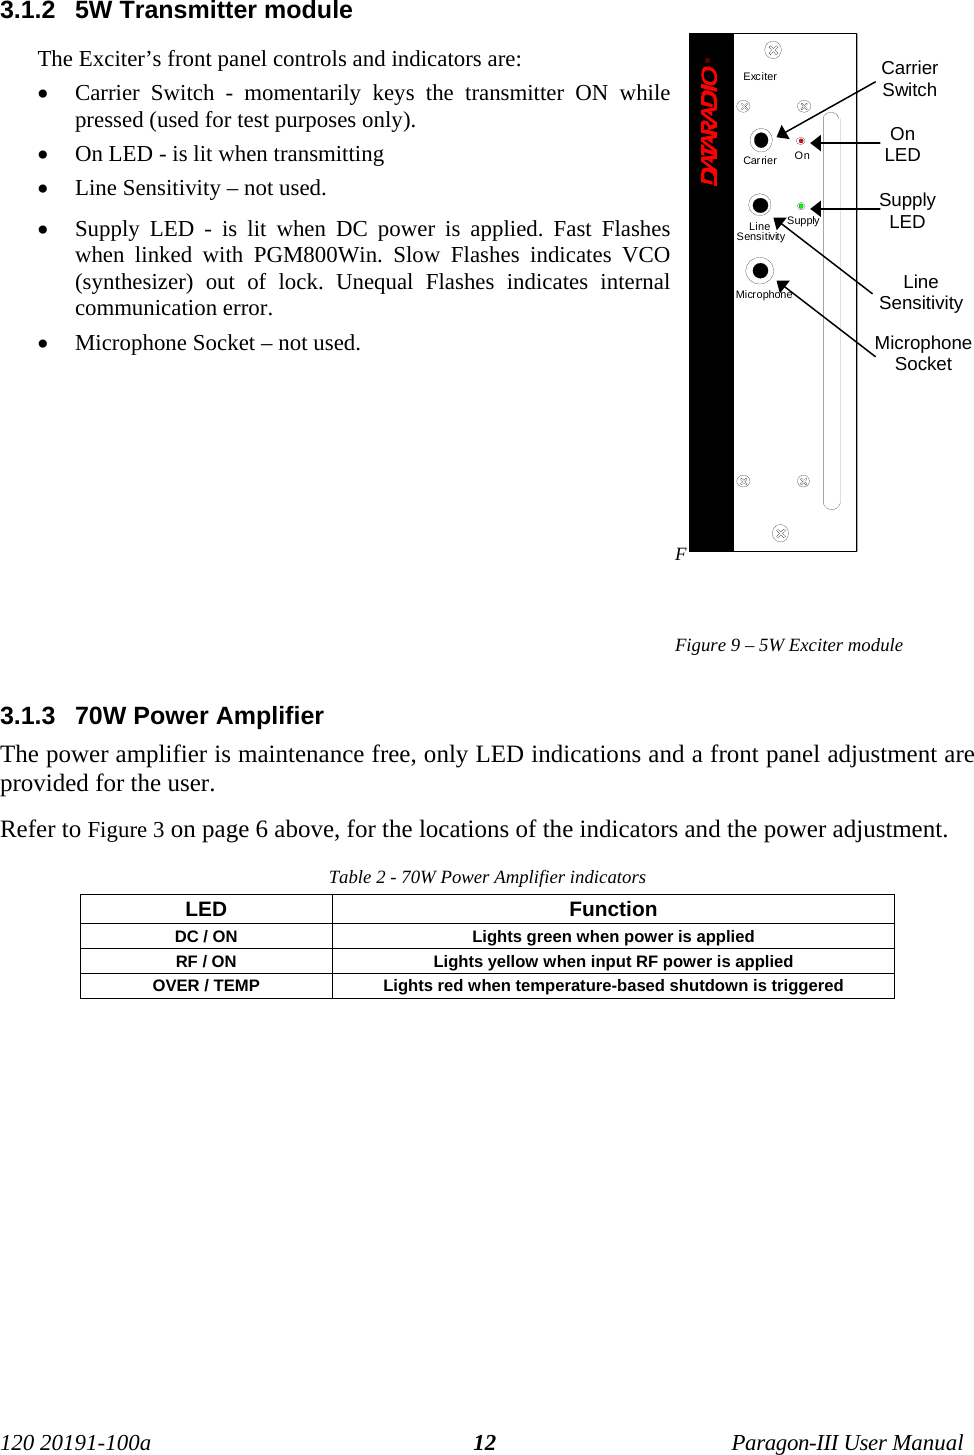 120 20191-100a Paragon-III User Manual123.1.2  5W Transmitter moduleThe Exciter’s front panel controls and indicators are:• Carrier Switch - momentarily keys the transmitter ON whilepressed (used for test purposes only).• On LED - is lit when transmitting• Line Sensitivity – not used.• Supply LED - is lit when DC power is applied. Fast Flasheswhen linked with PGM800Win. Slow Flashes indicates VCO(synthesizer) out of lock. Unequal Flashes indicates internalcommunication error.• Microphone Socket – not used. FFigure 9 – 5W Exciter module3.1.3  70W Power AmplifierThe power amplifier is maintenance free, only LED indications and a front panel adjustment areprovided for the user.Refer to Figure 3 on page 6 above, for the locations of the indicators and the power adjustment.Table 2 - 70W Power Amplifier indicatorsLED FunctionDC / ON Lights green when power is appliedRF / ON Lights yellow when input RF power is appliedOVER / TEMP Lights red when temperature-based shutdown is triggeredCarrierSwitchOnLEDSupplyLEDLineSensitivityMicrophoneSocket®ExciterCarrier OnLineSensi tivitySupplyMicrophone